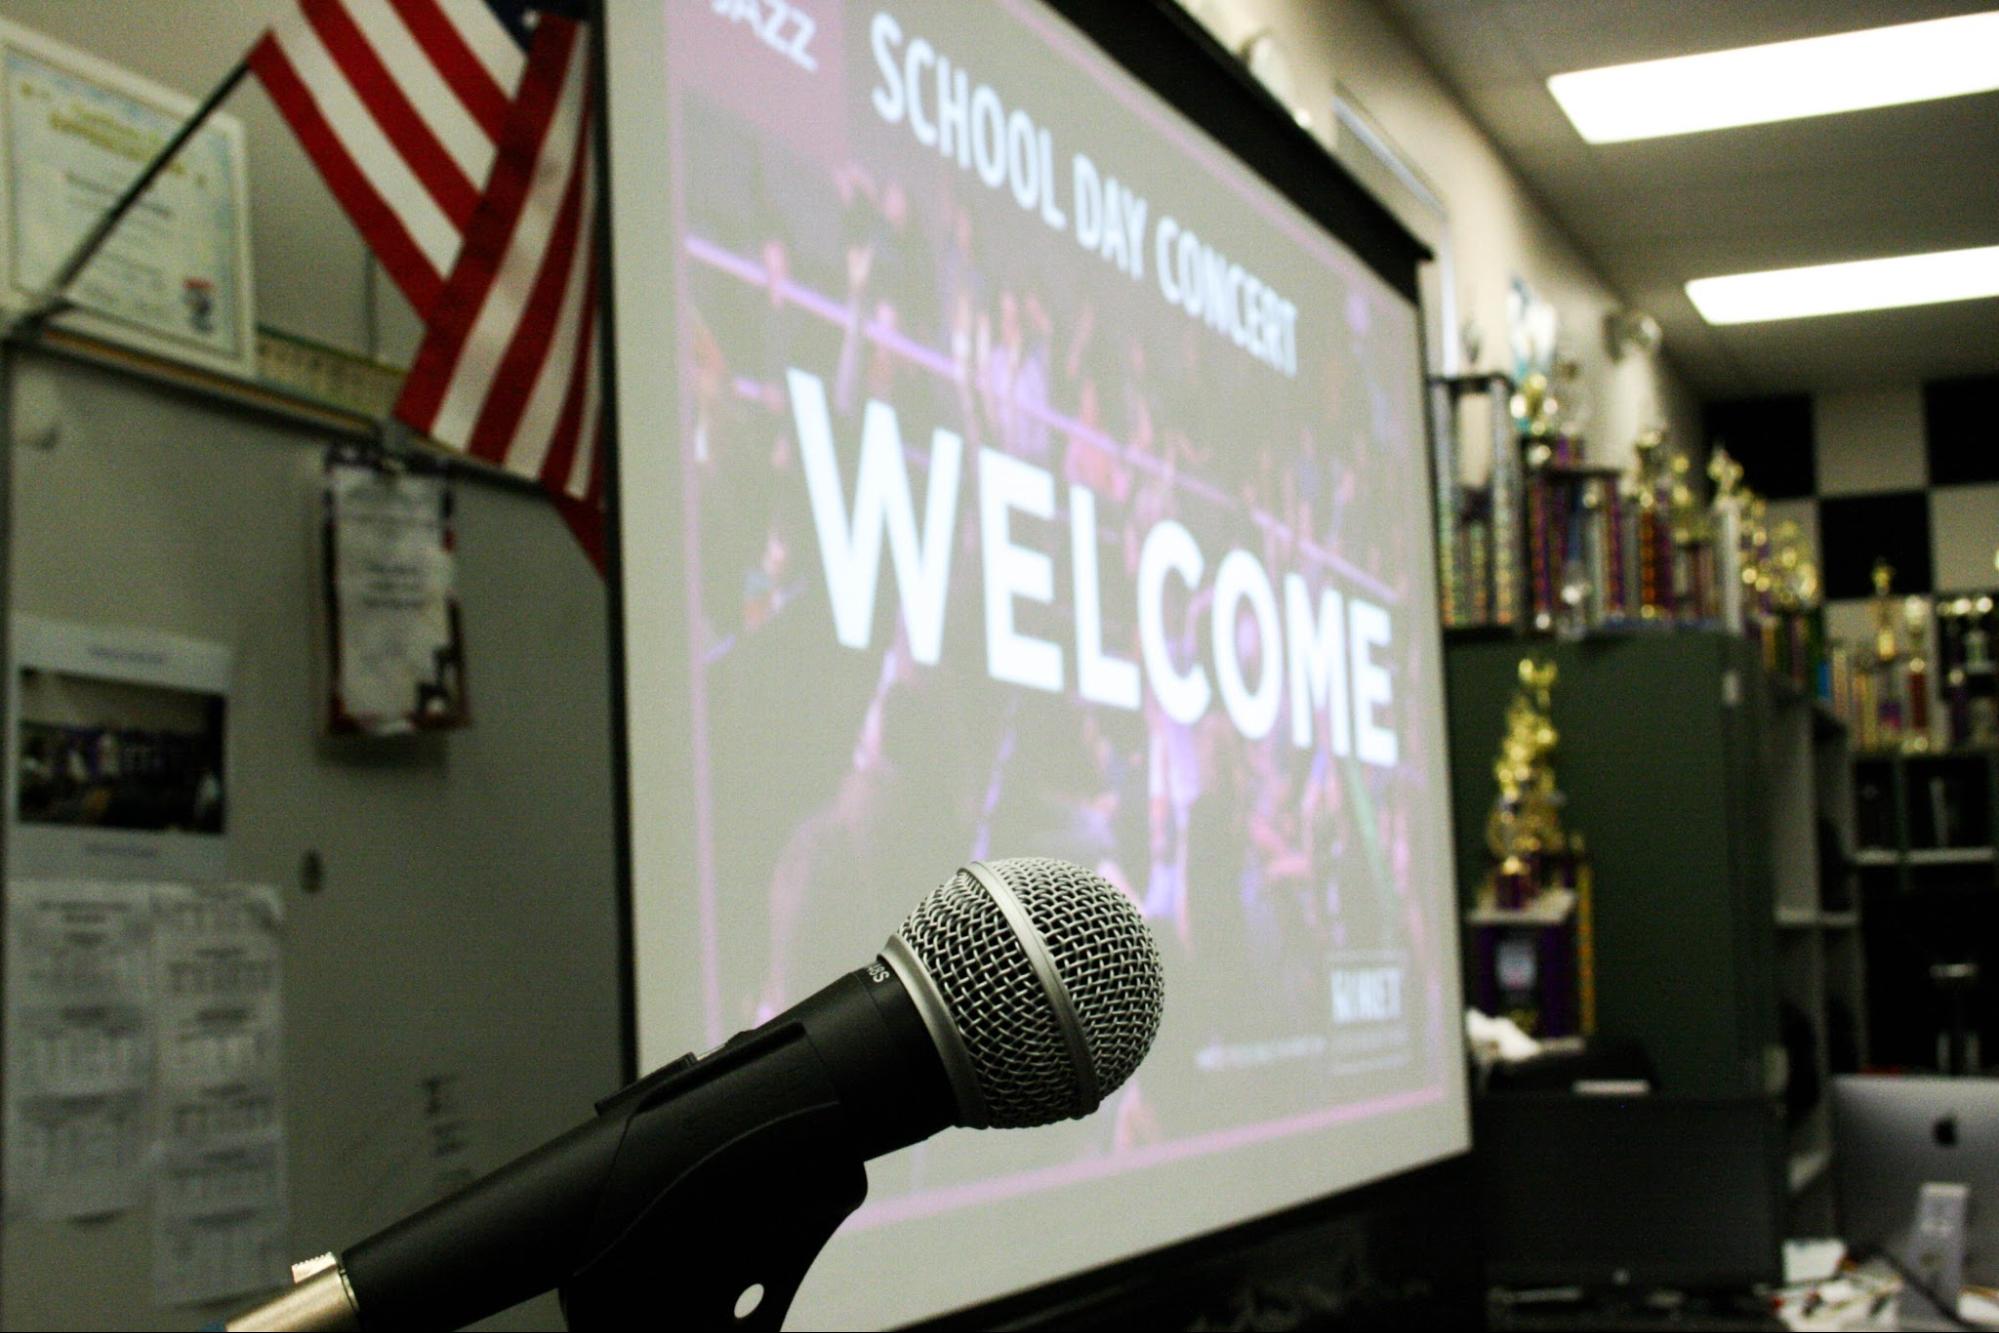 Toby Johnson Middle School band room is ready to start the videoconference!